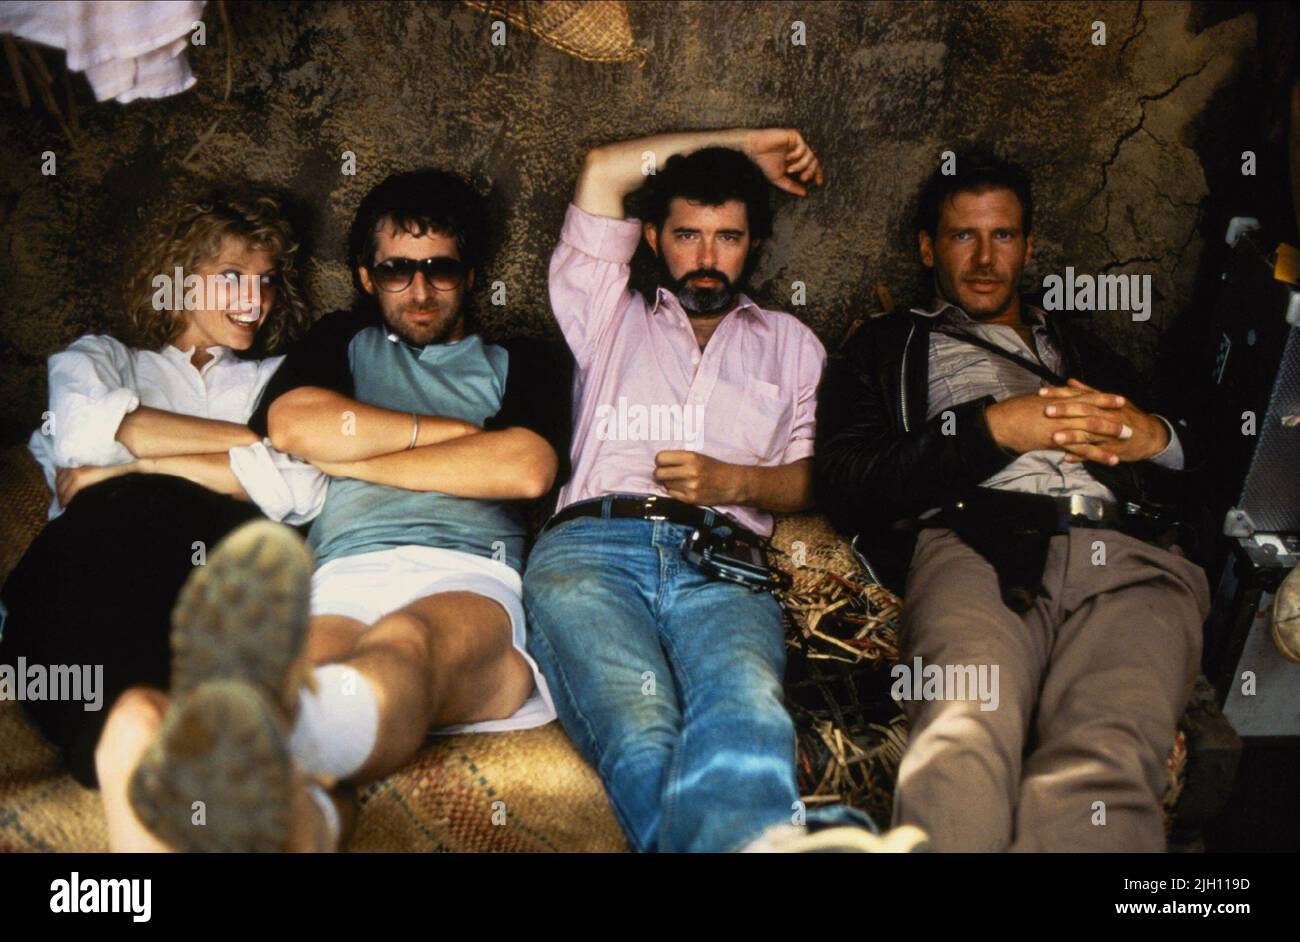 CAPSHAW,SPIELBERG,LUCAS,FORD, INDIANA JONES AND THE TEMPLE OF DOOM, 1984 Stock Photo